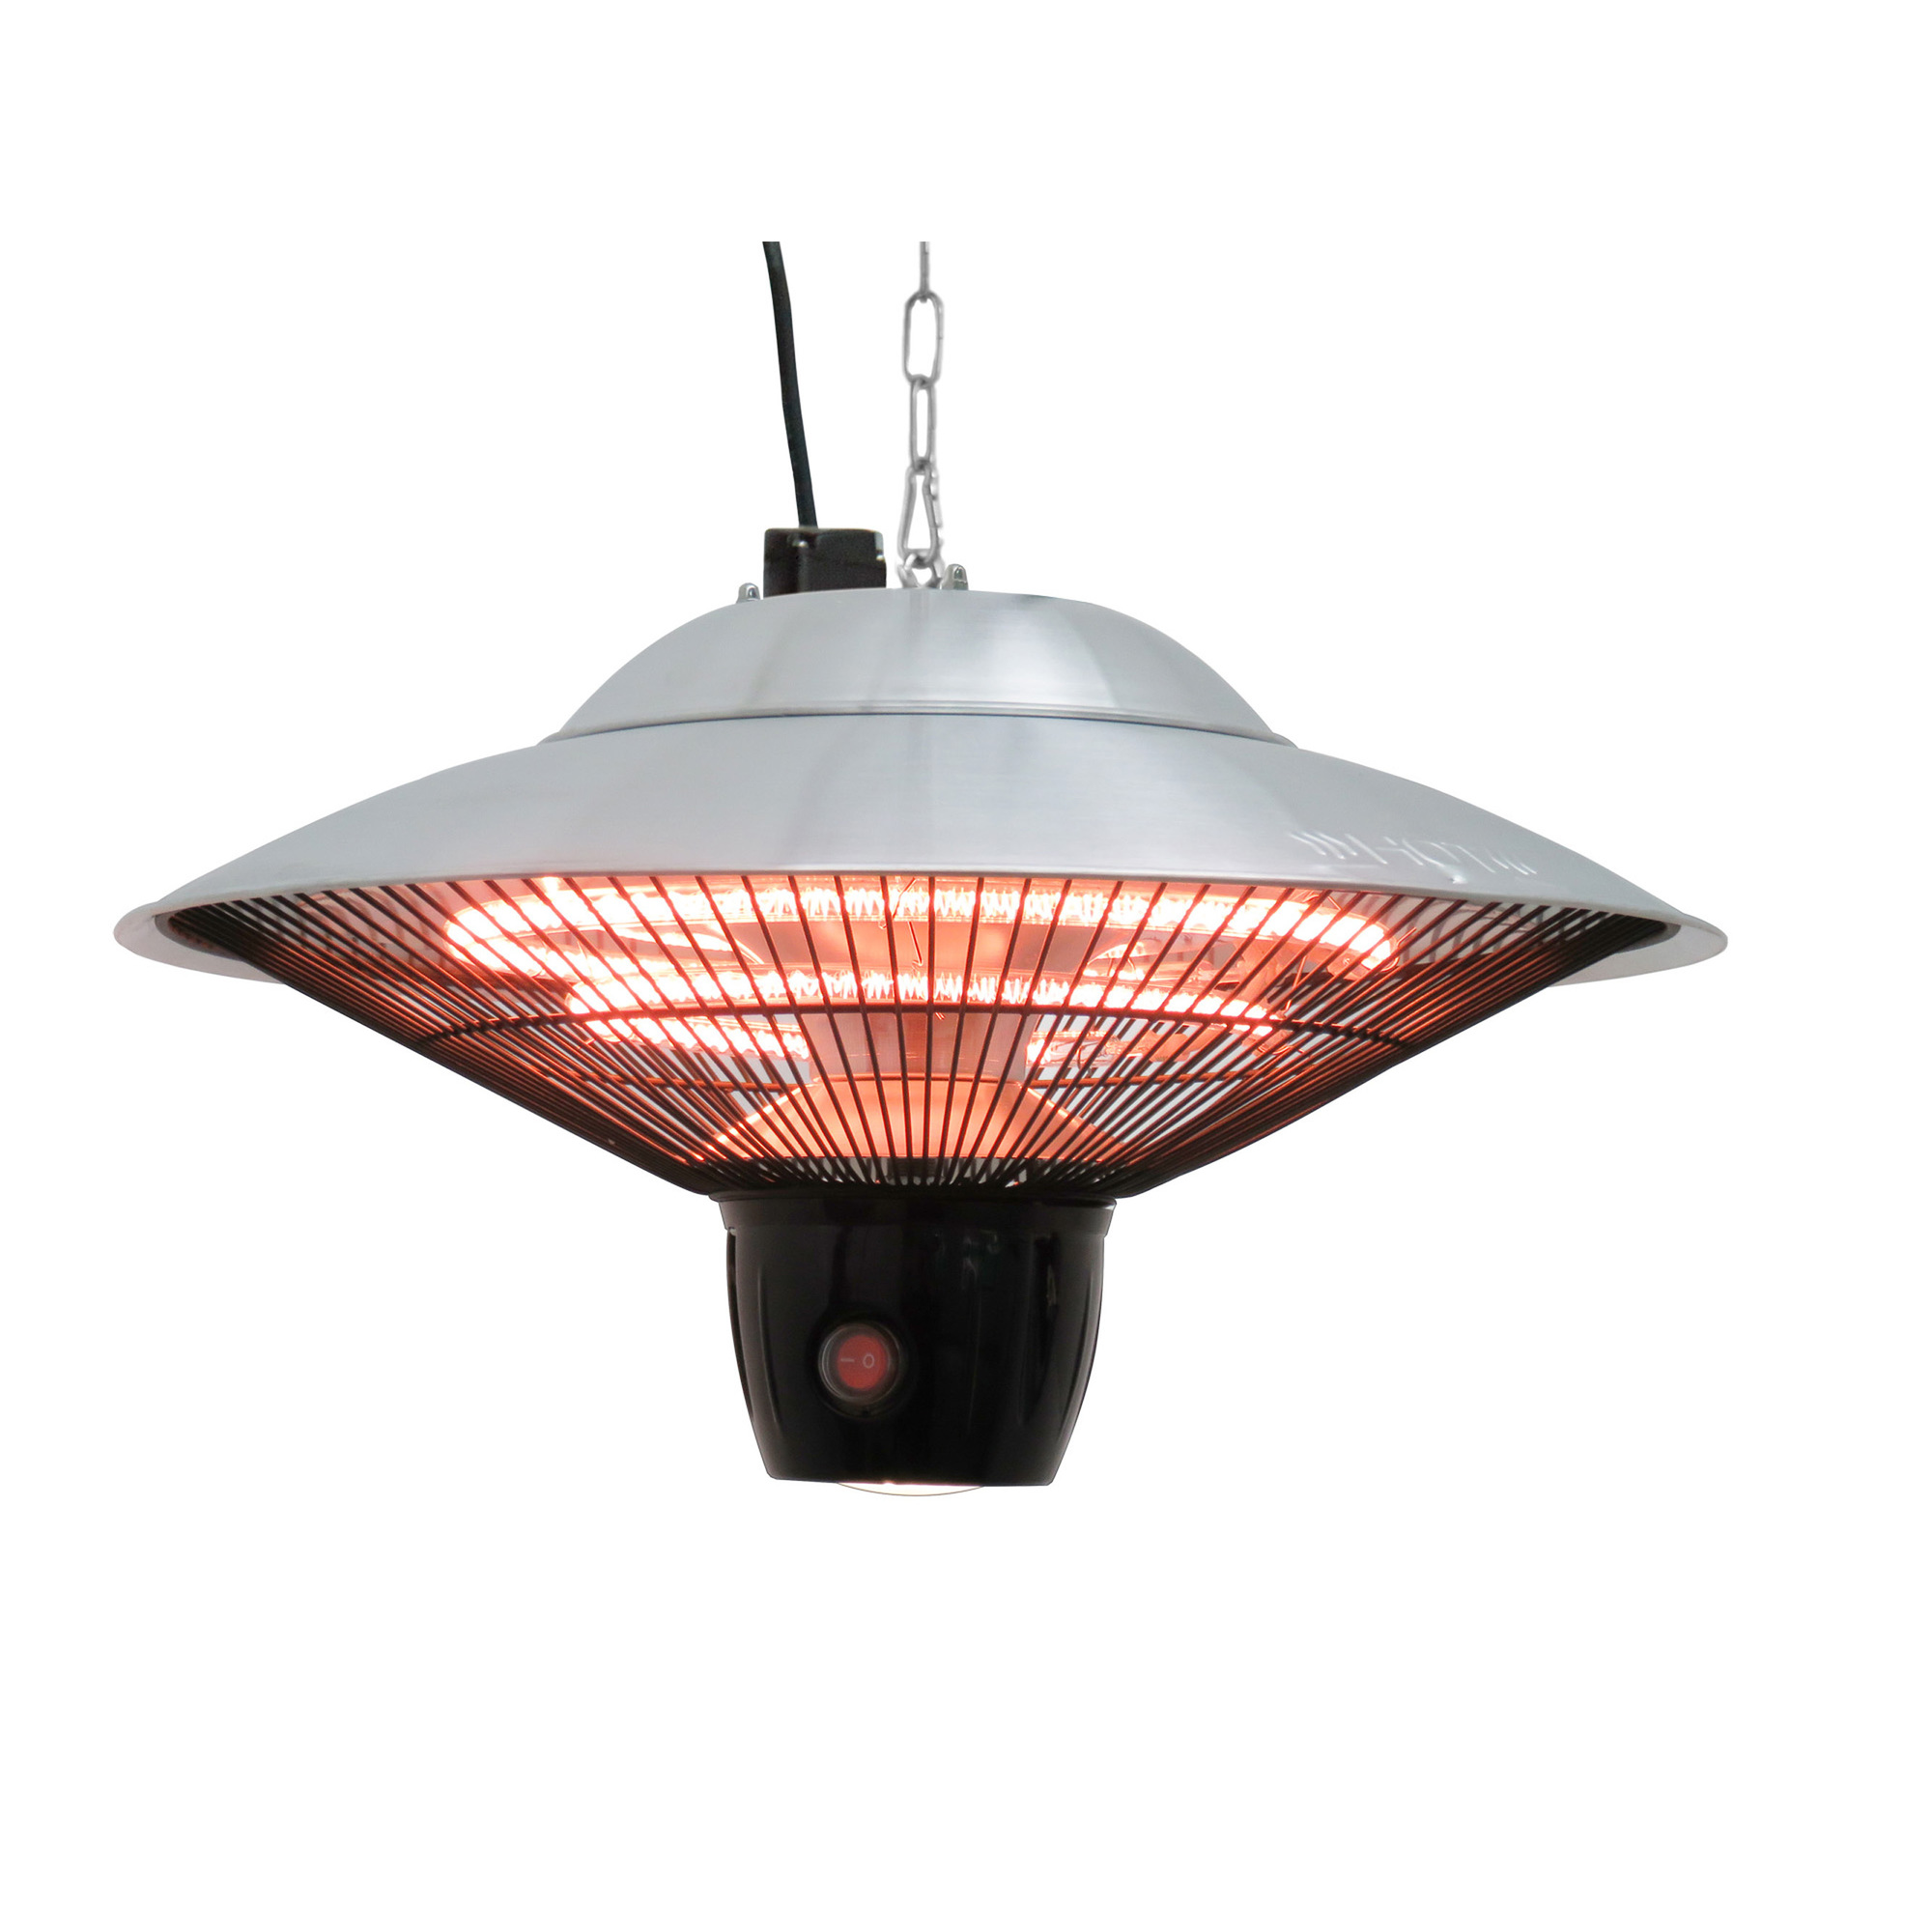 Westinghouse, Hanging patio heater with remote and LED, Model WES31-1544